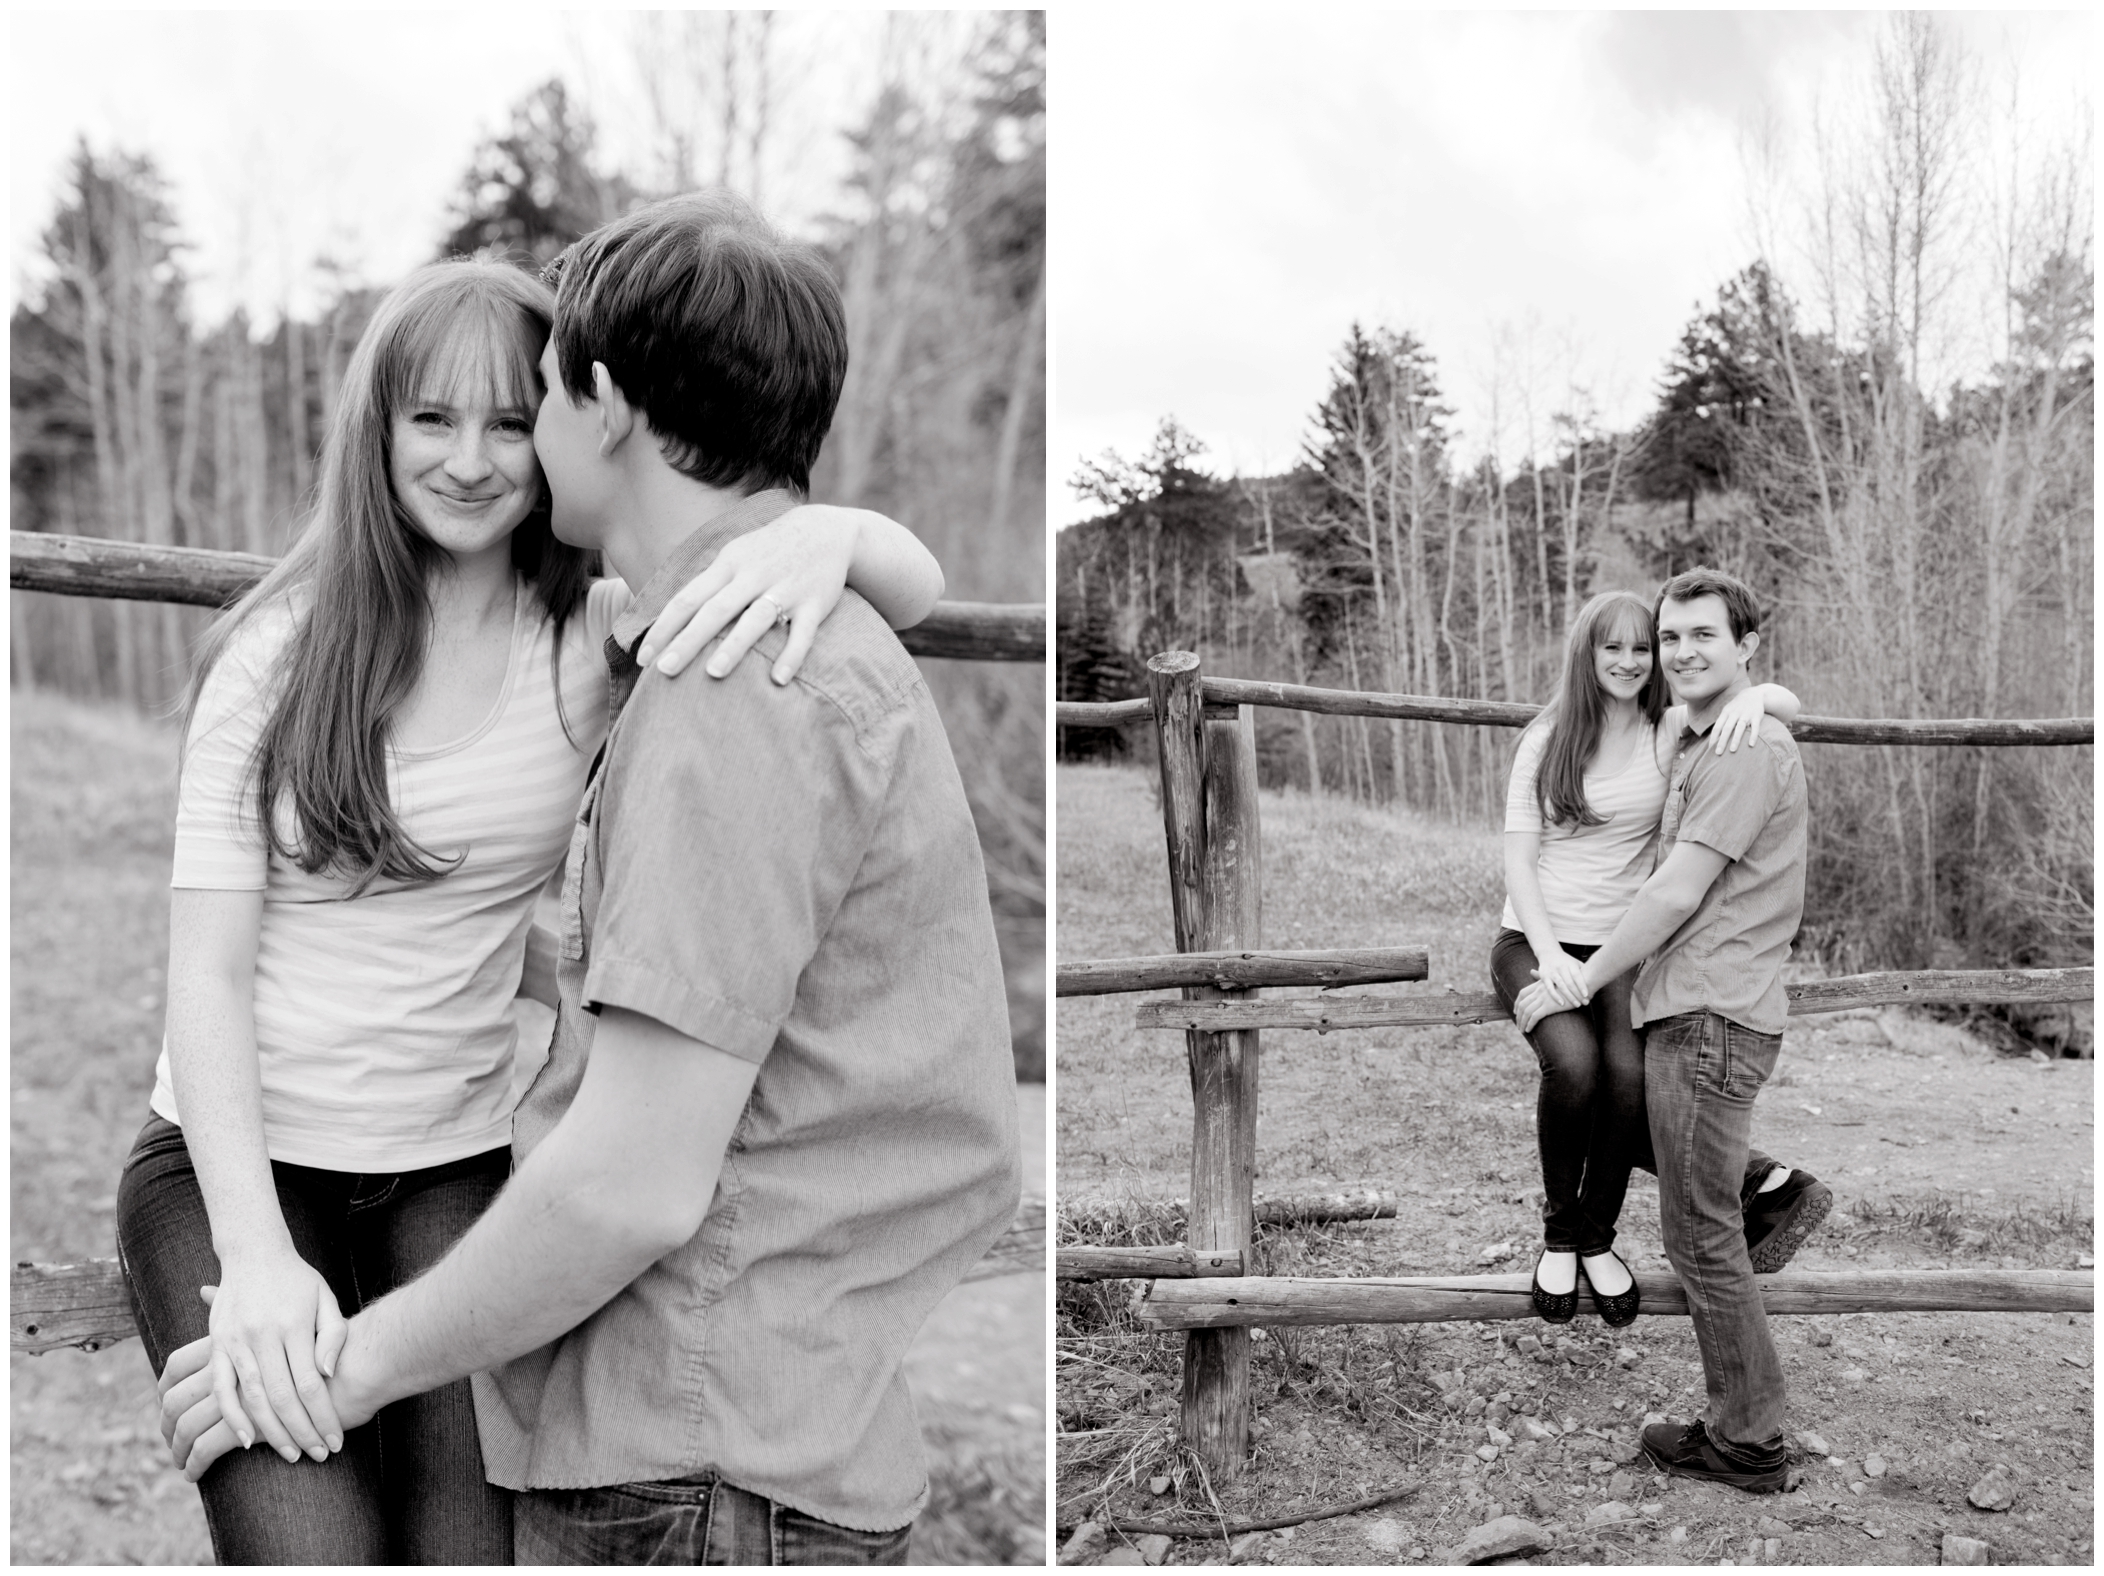 picture of Colorado mountain engagement photography 